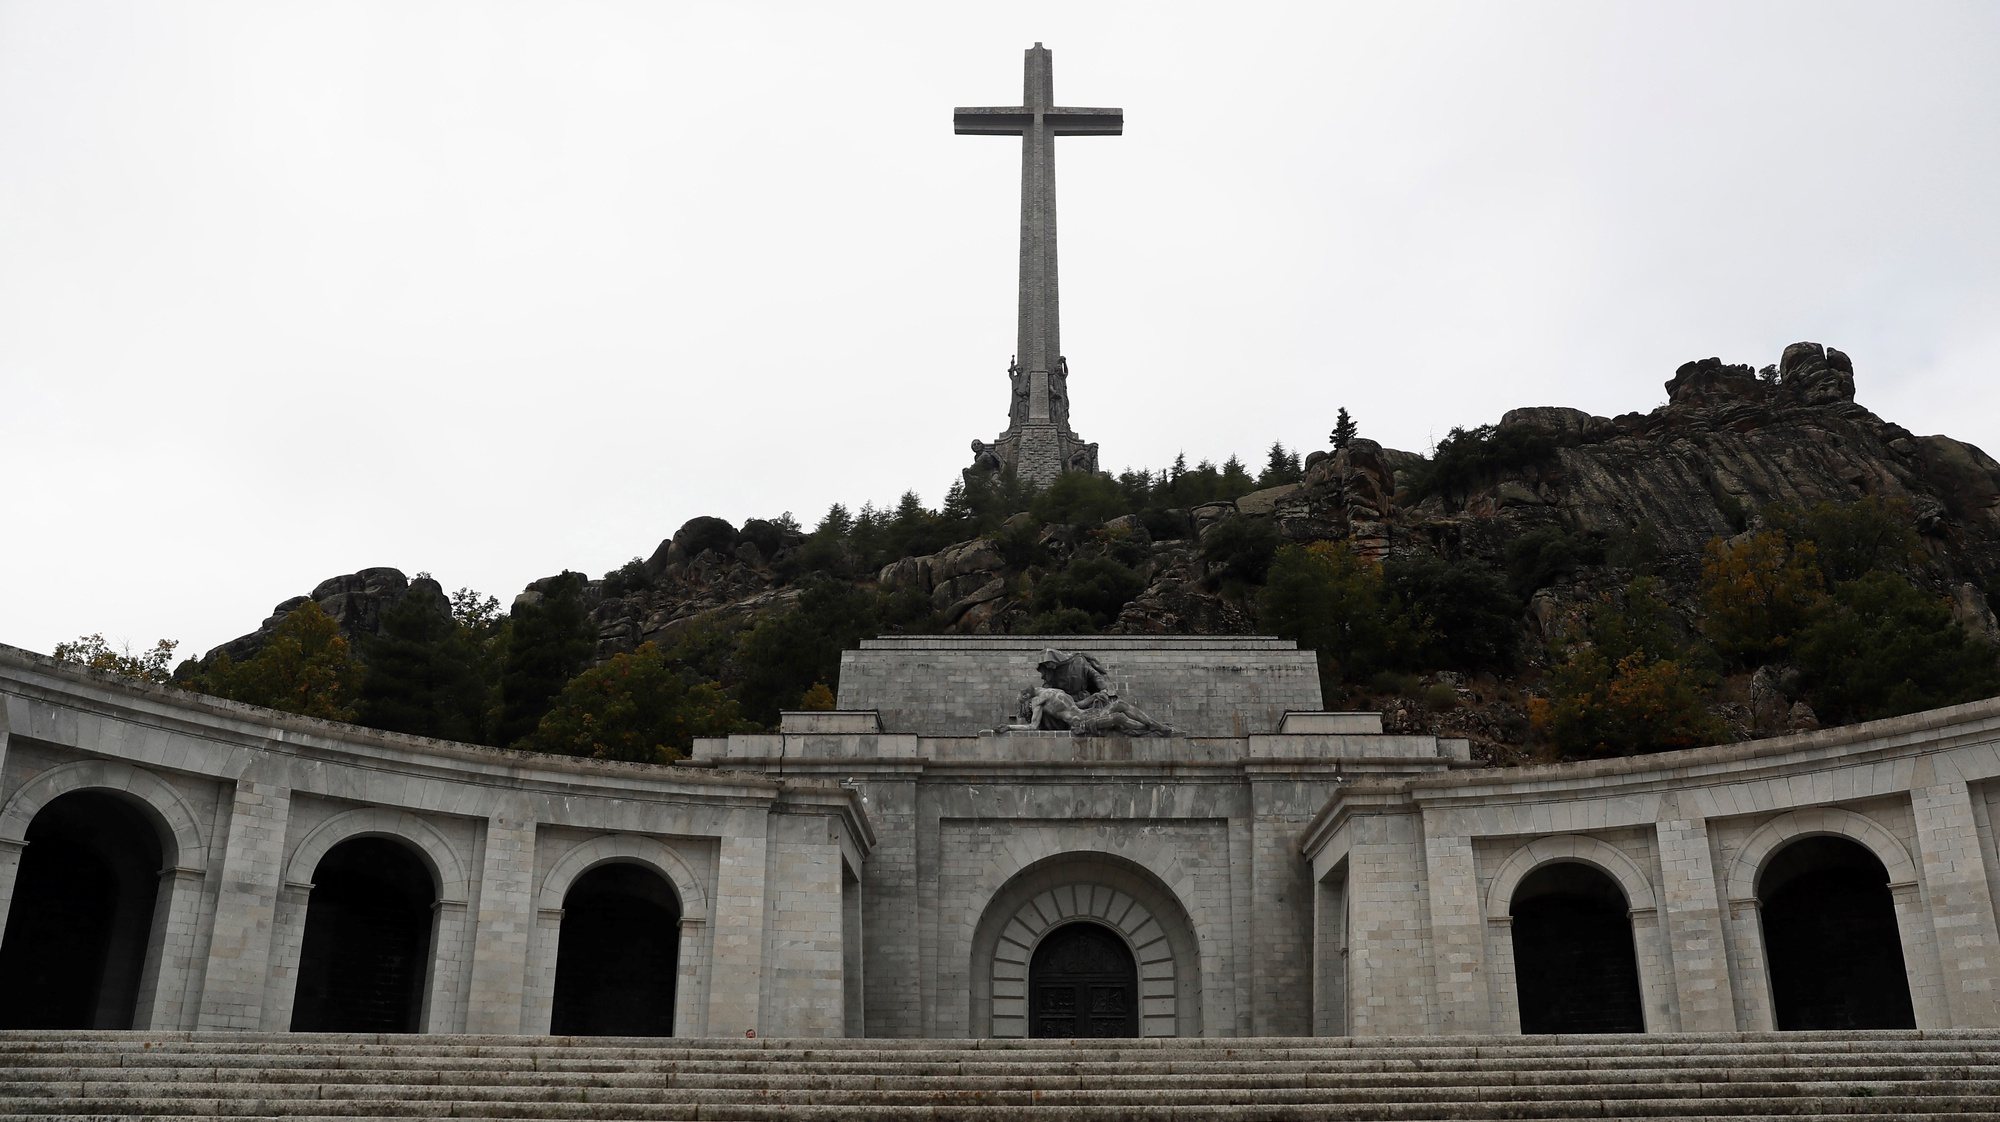 epa07957623 A view of El Valle de los Caidos Memorial after it reopened its doors for the public following the exhumation works of Spanish dictator Francisco Franco, in San Lorenzo del Escorial, Madrid, Spain, 29 October 2019. The memorial has remained closed since the last 11 October to carry out the exhumation of Franco&#039;s remains back on 24 October, when they were taken to Mingorrubio cemetery observing Supreme Courts orders. The reopening of the memorial has started with all tickets sold out online.  EPA/Mariscal